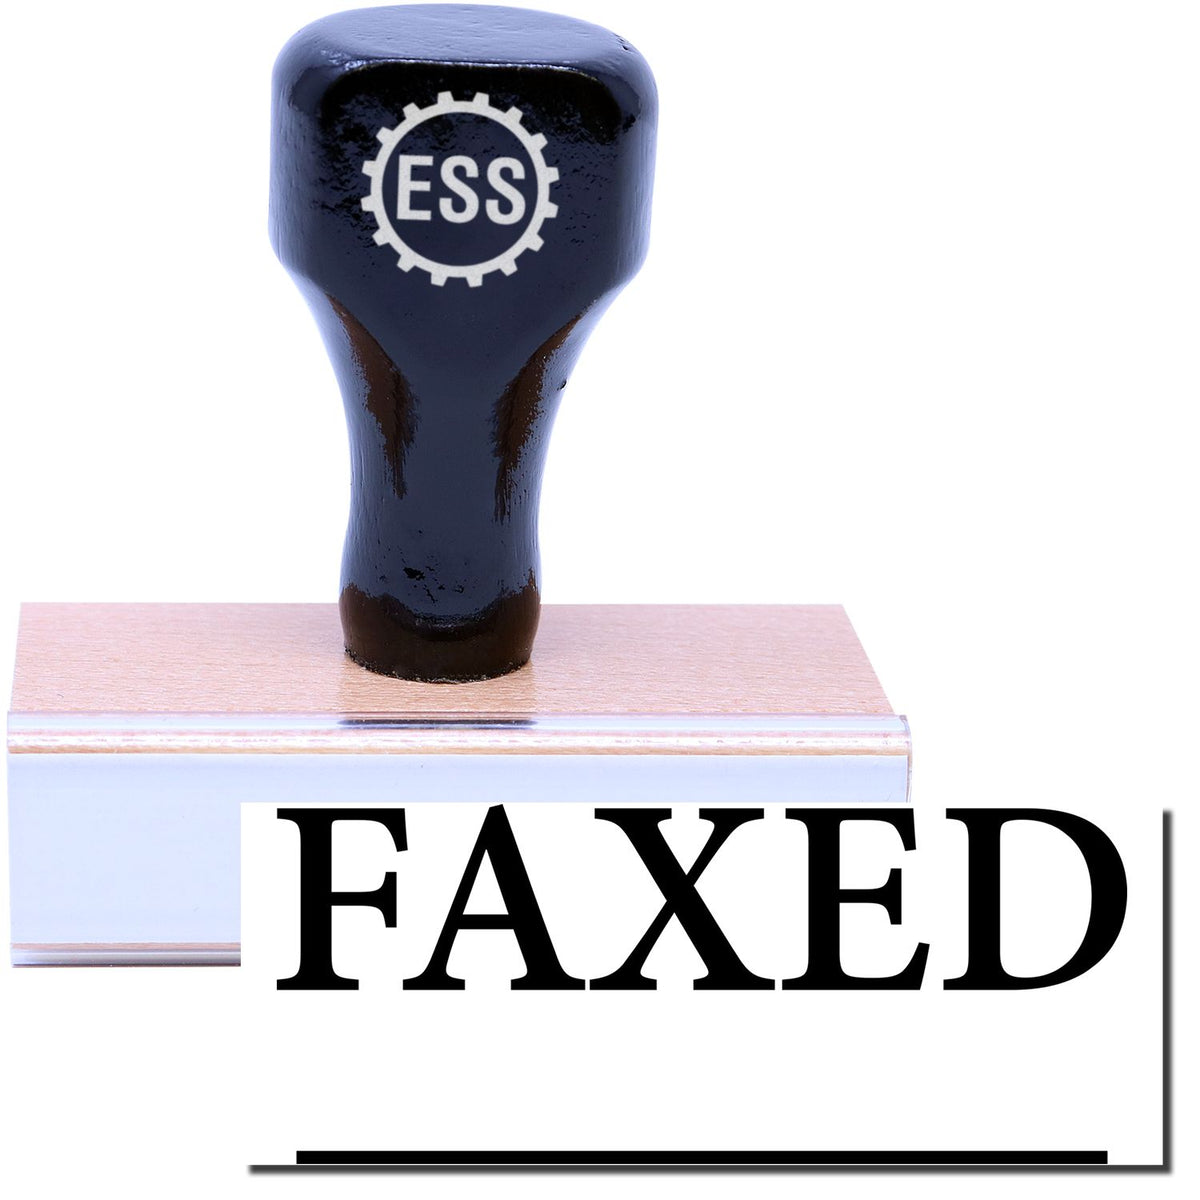 A stock office rubber stamp with a stamped image showing how the text &quot;FAXED&quot; in a large times font with a line underneath the text is displayed after stamping.